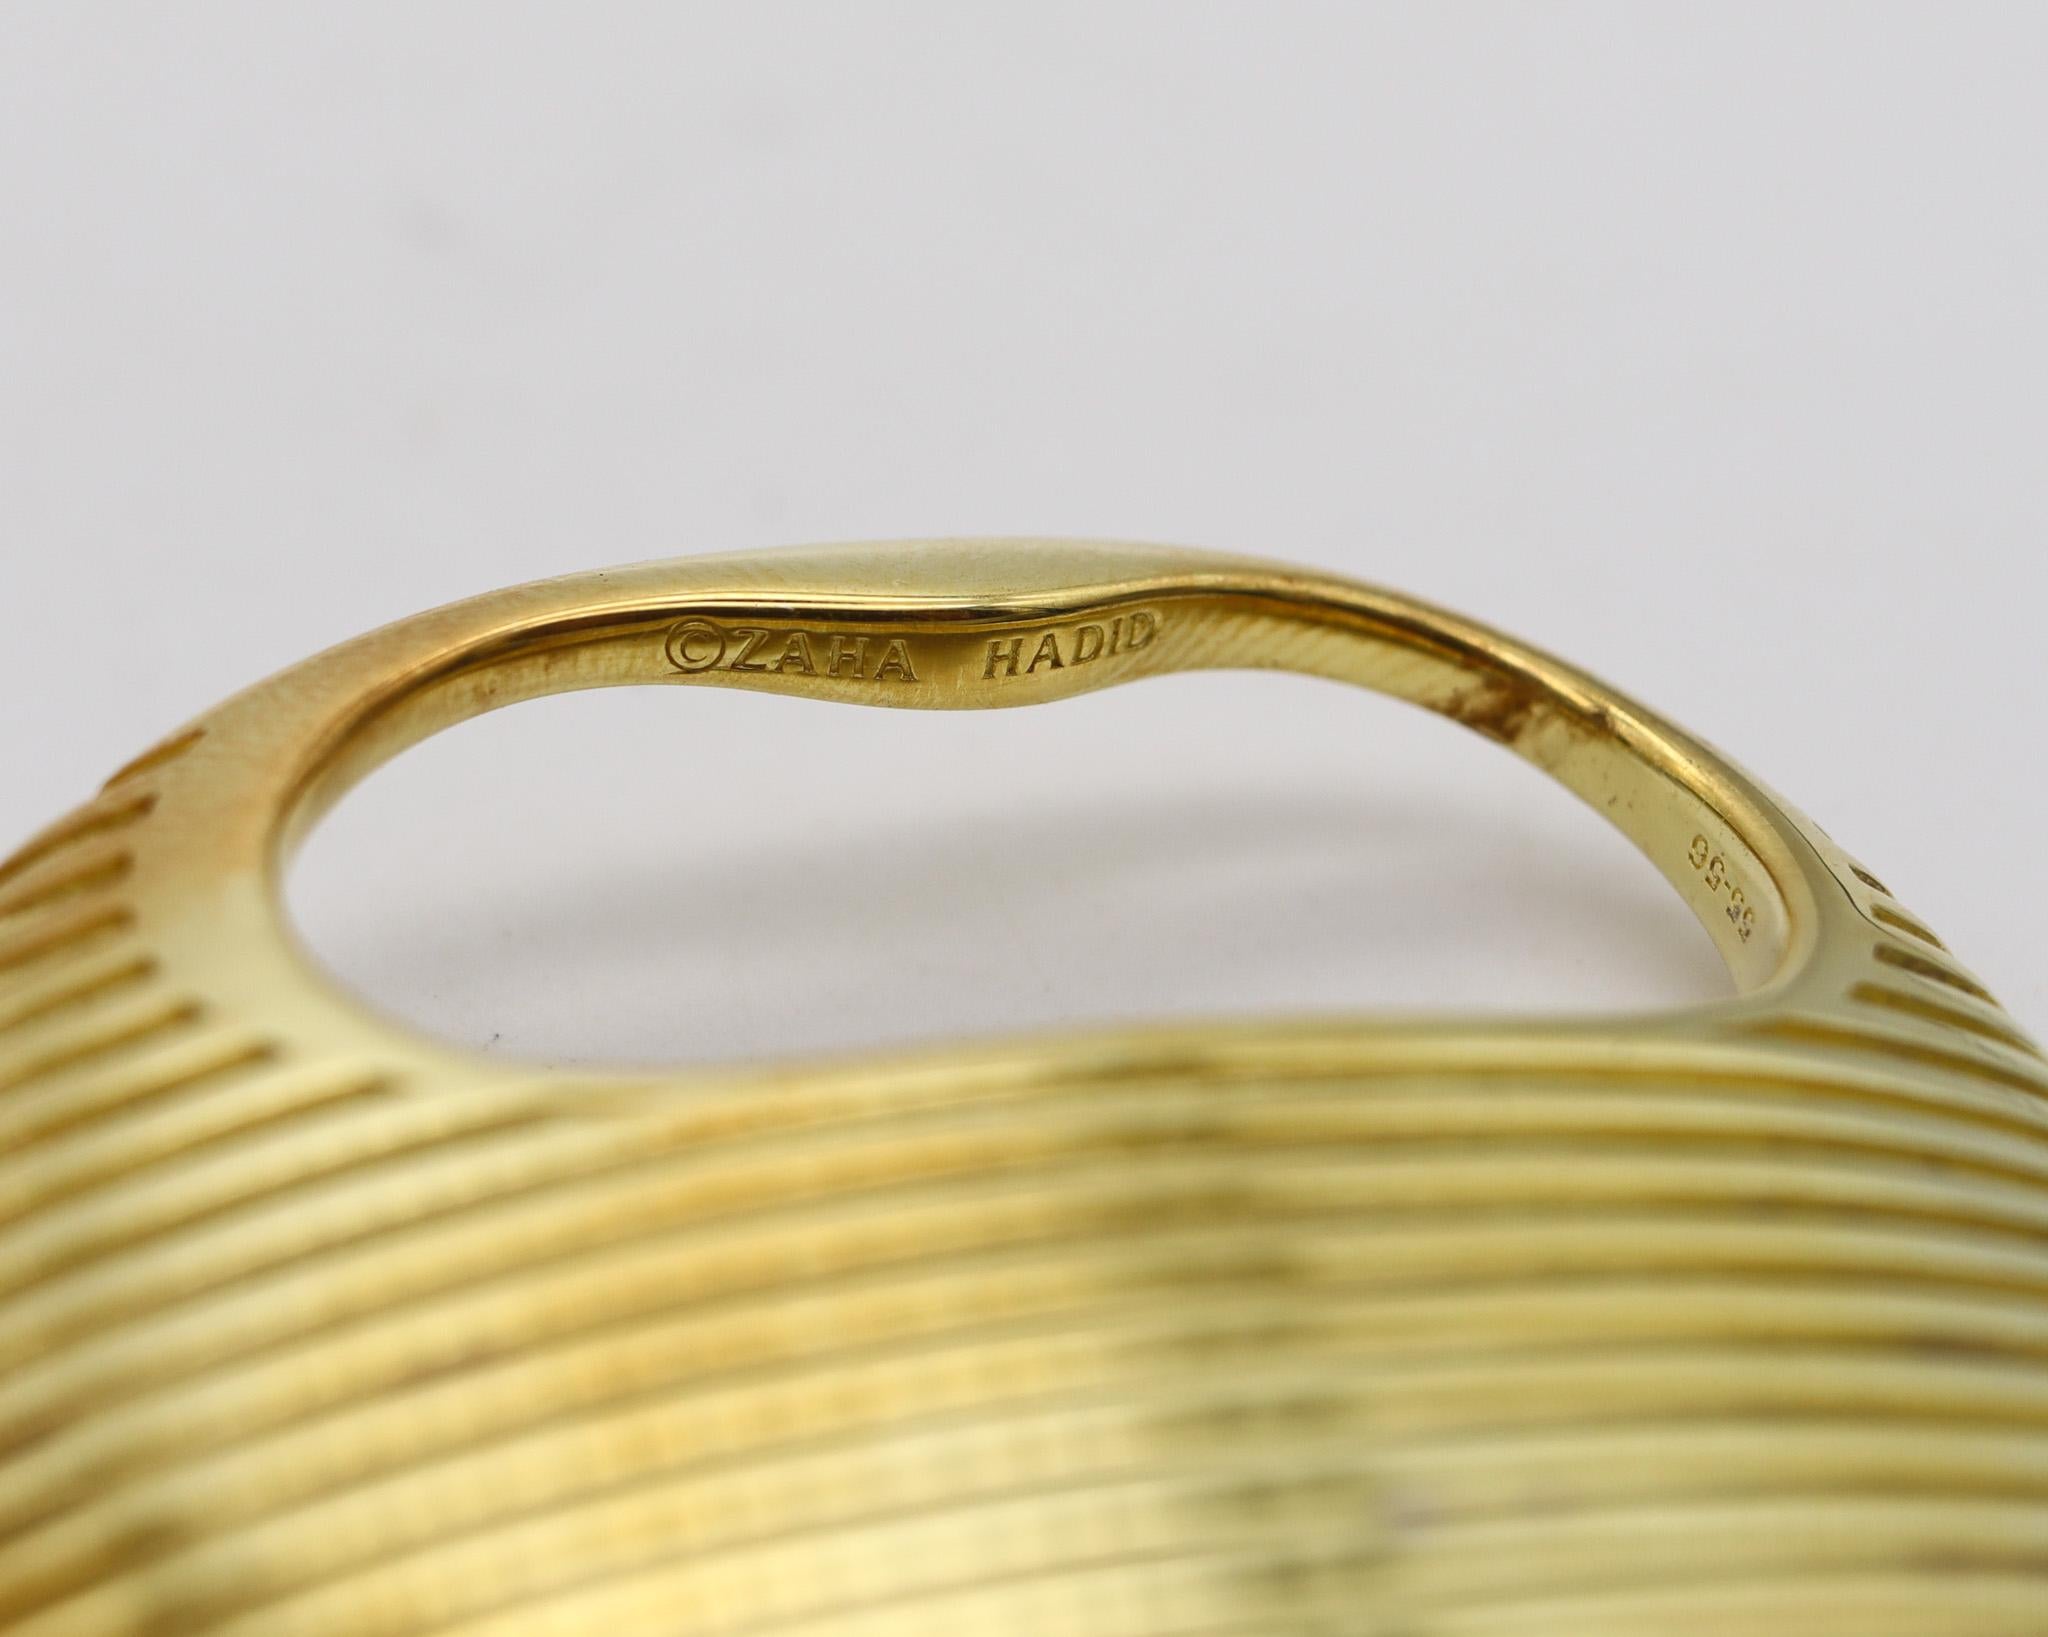 Zaha Hadid For Georg Jensen Lamellae Double Ring Sterling With 18Kt Gold Vermeil In Excellent Condition For Sale In Miami, FL